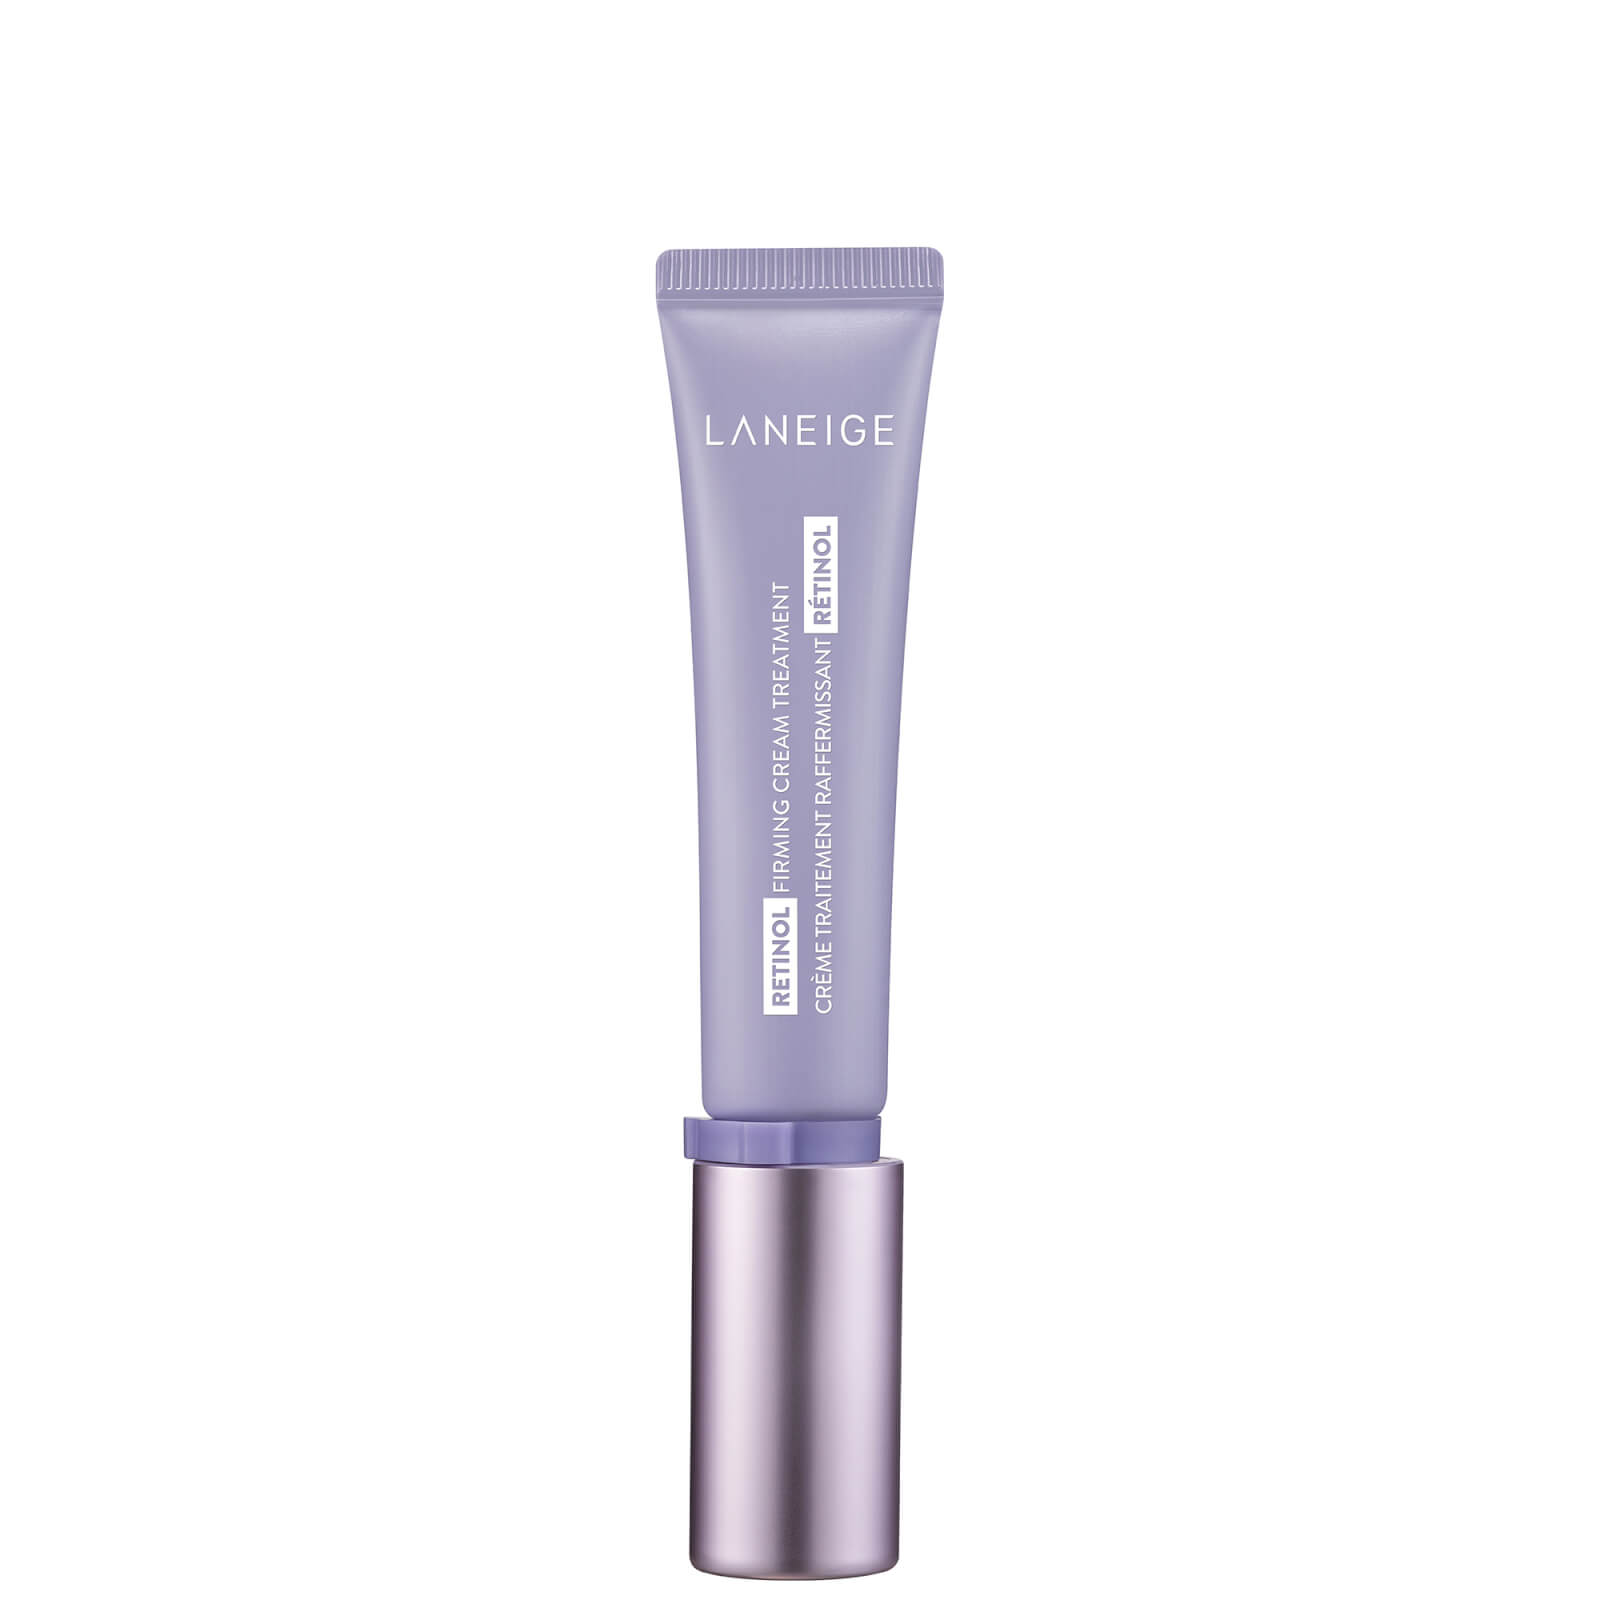 Laneige Retinol Firming Cream With Hyaluronic Acid For Targeted Treatment 0.5 oz / 15 ml